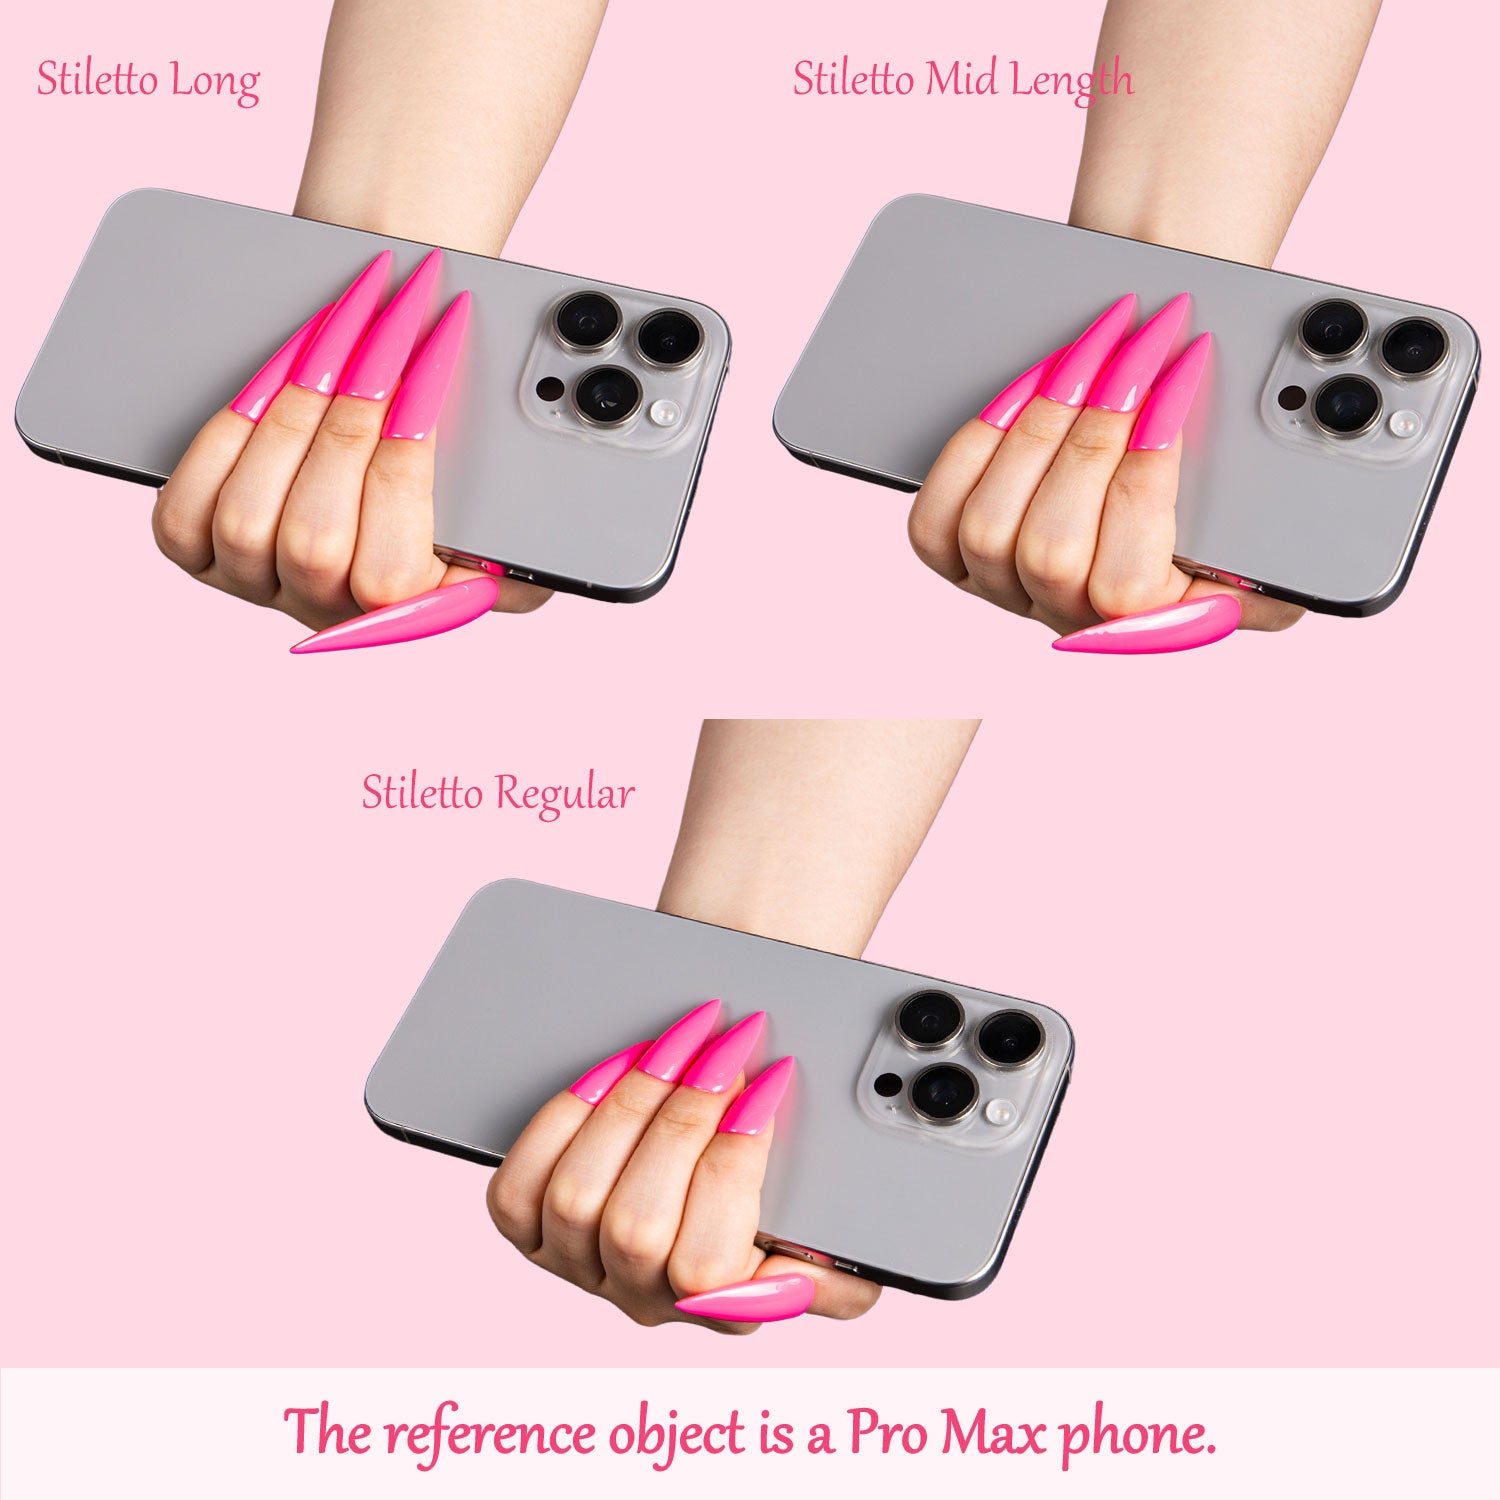 Comparison of three pink stiletto press-on nail lengths, Stiletto Long, Stiletto Mid Length, and Stiletto Regular, with a Pro Max phone as a reference object.